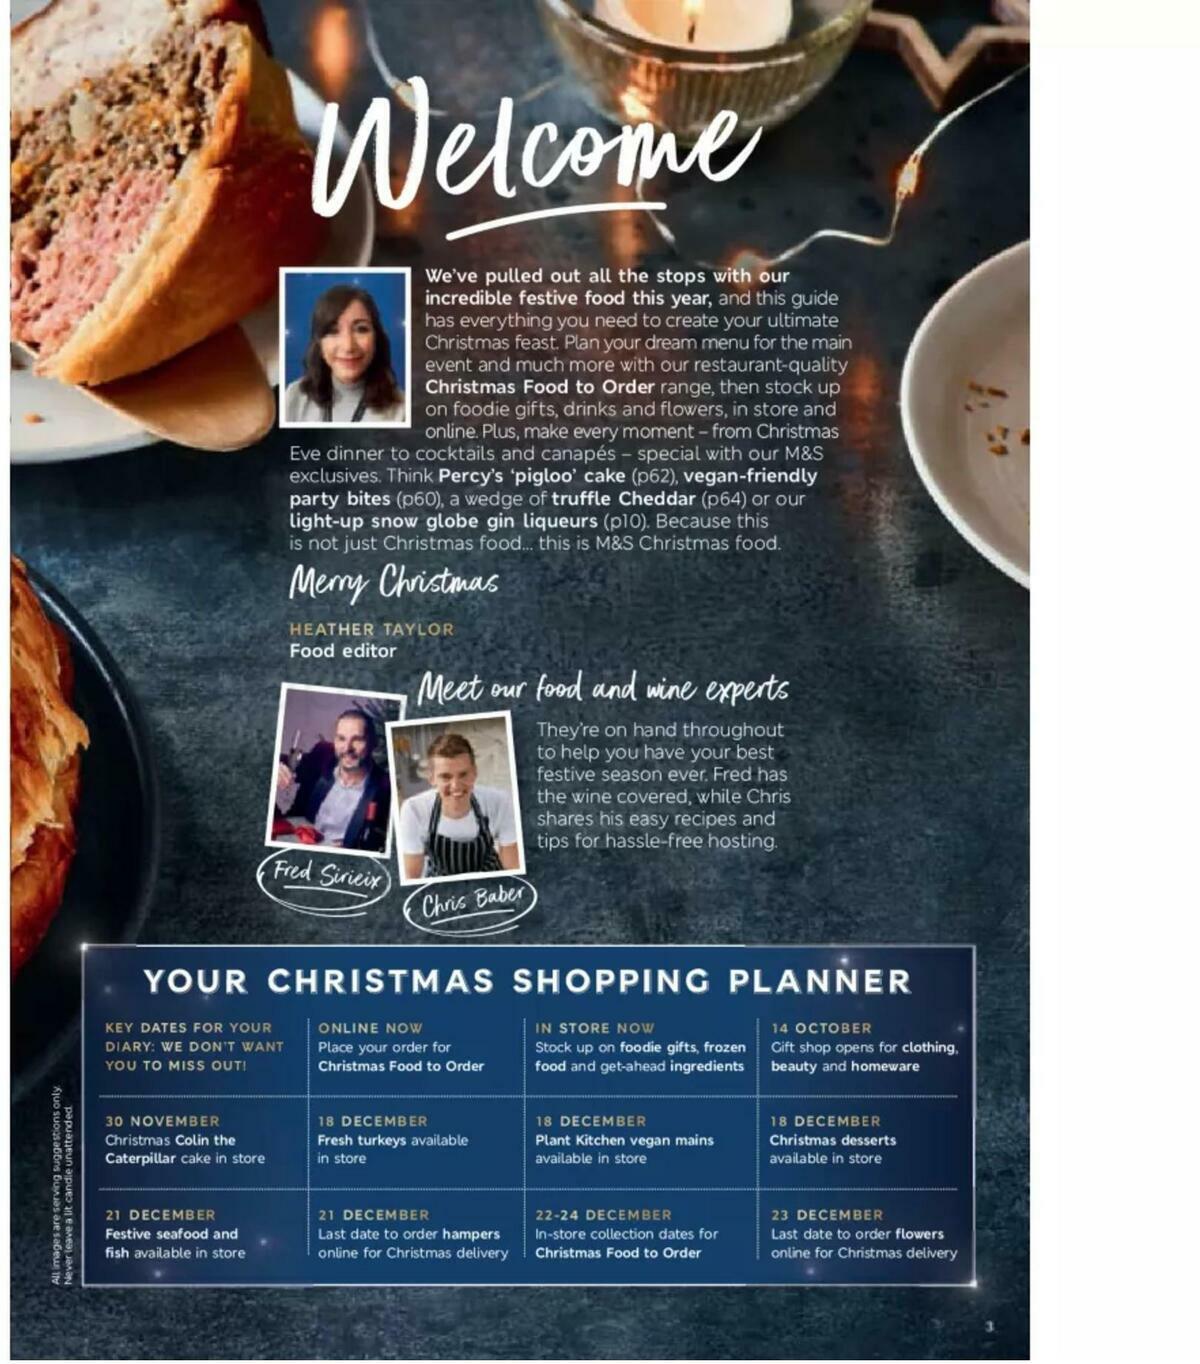 M&S Marks and Spencer Christmas Food Offers from 15 October